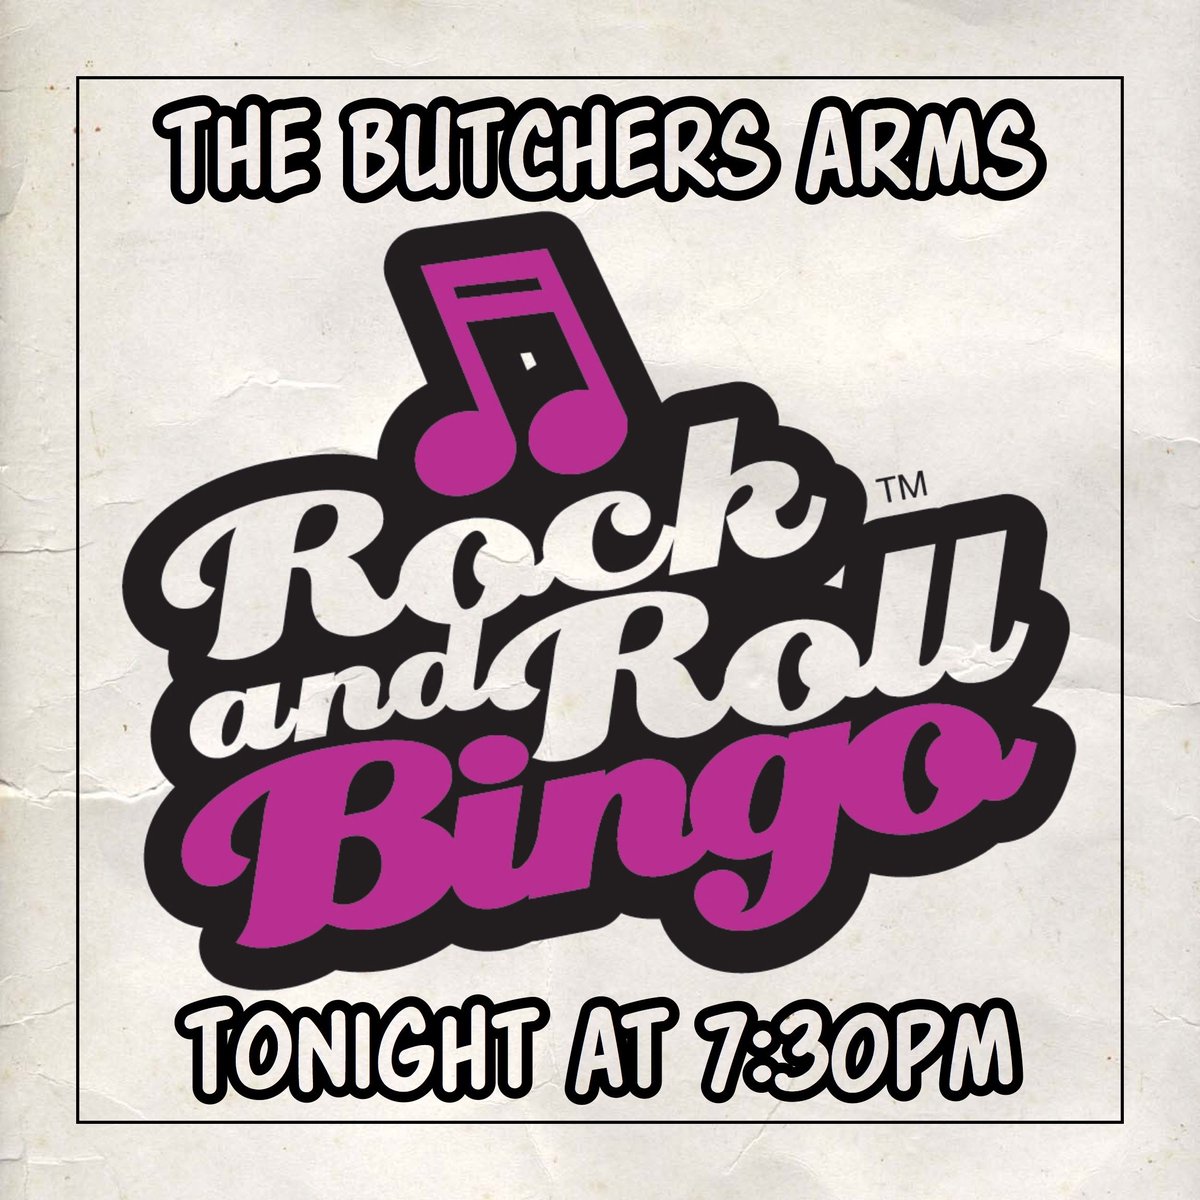 It’s #RockAndRollBingo night at #TheButchersArms in #Sheepscombe! 7:30pm with cash to be won